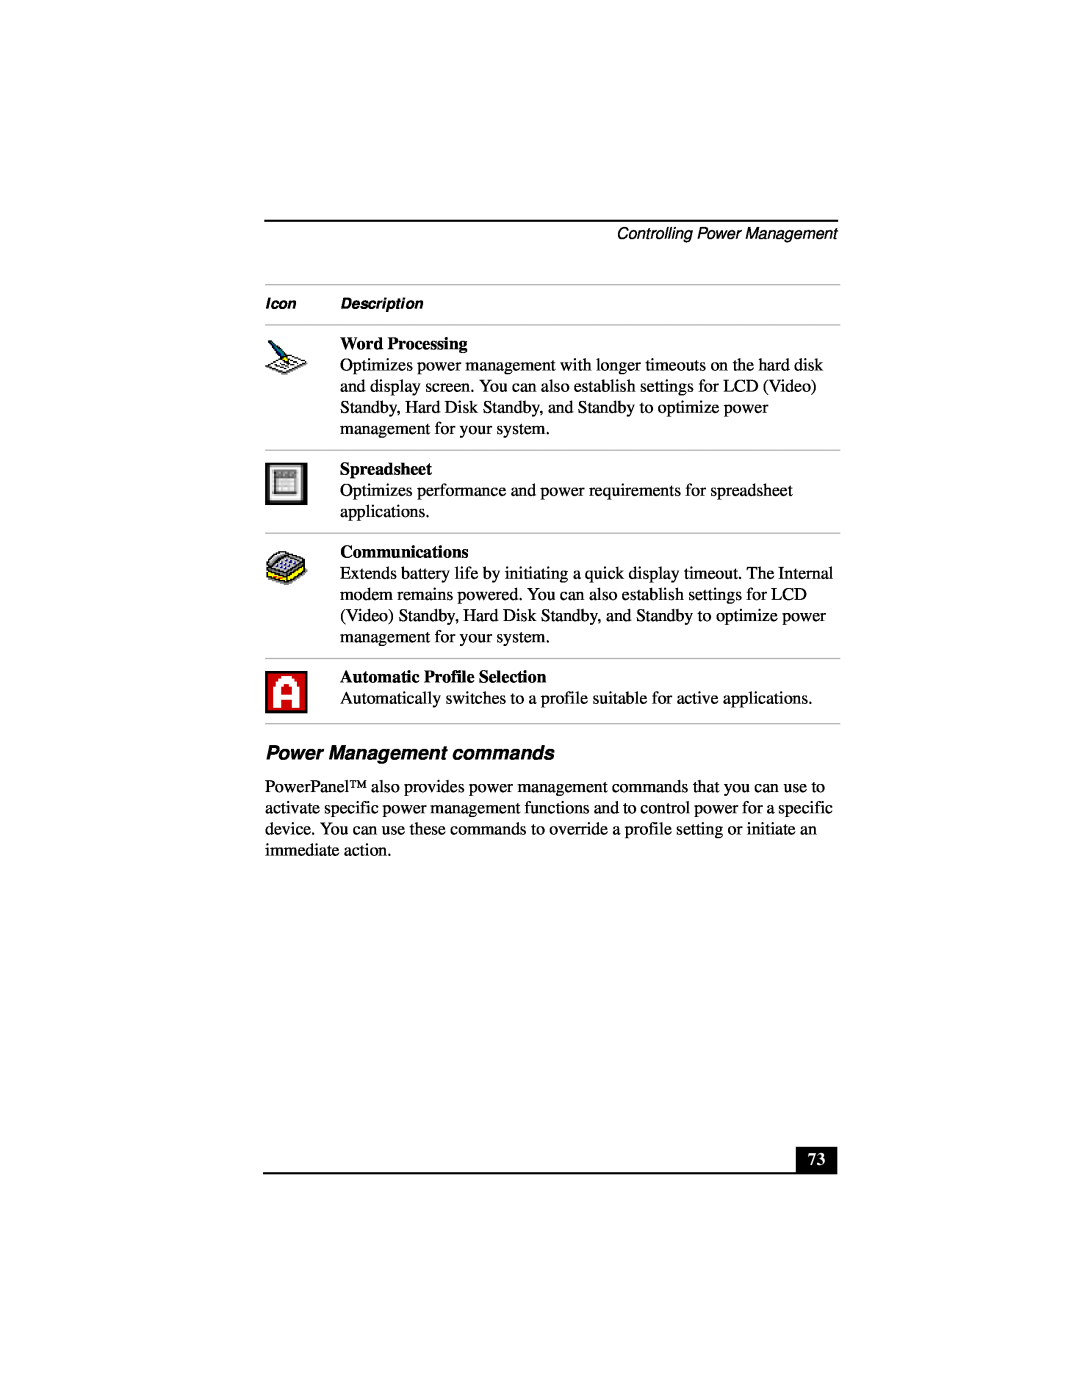 Sony Notebook Computer manual Power Management commands, Icon Description, Word Processing, Spreadsheet, Communications 